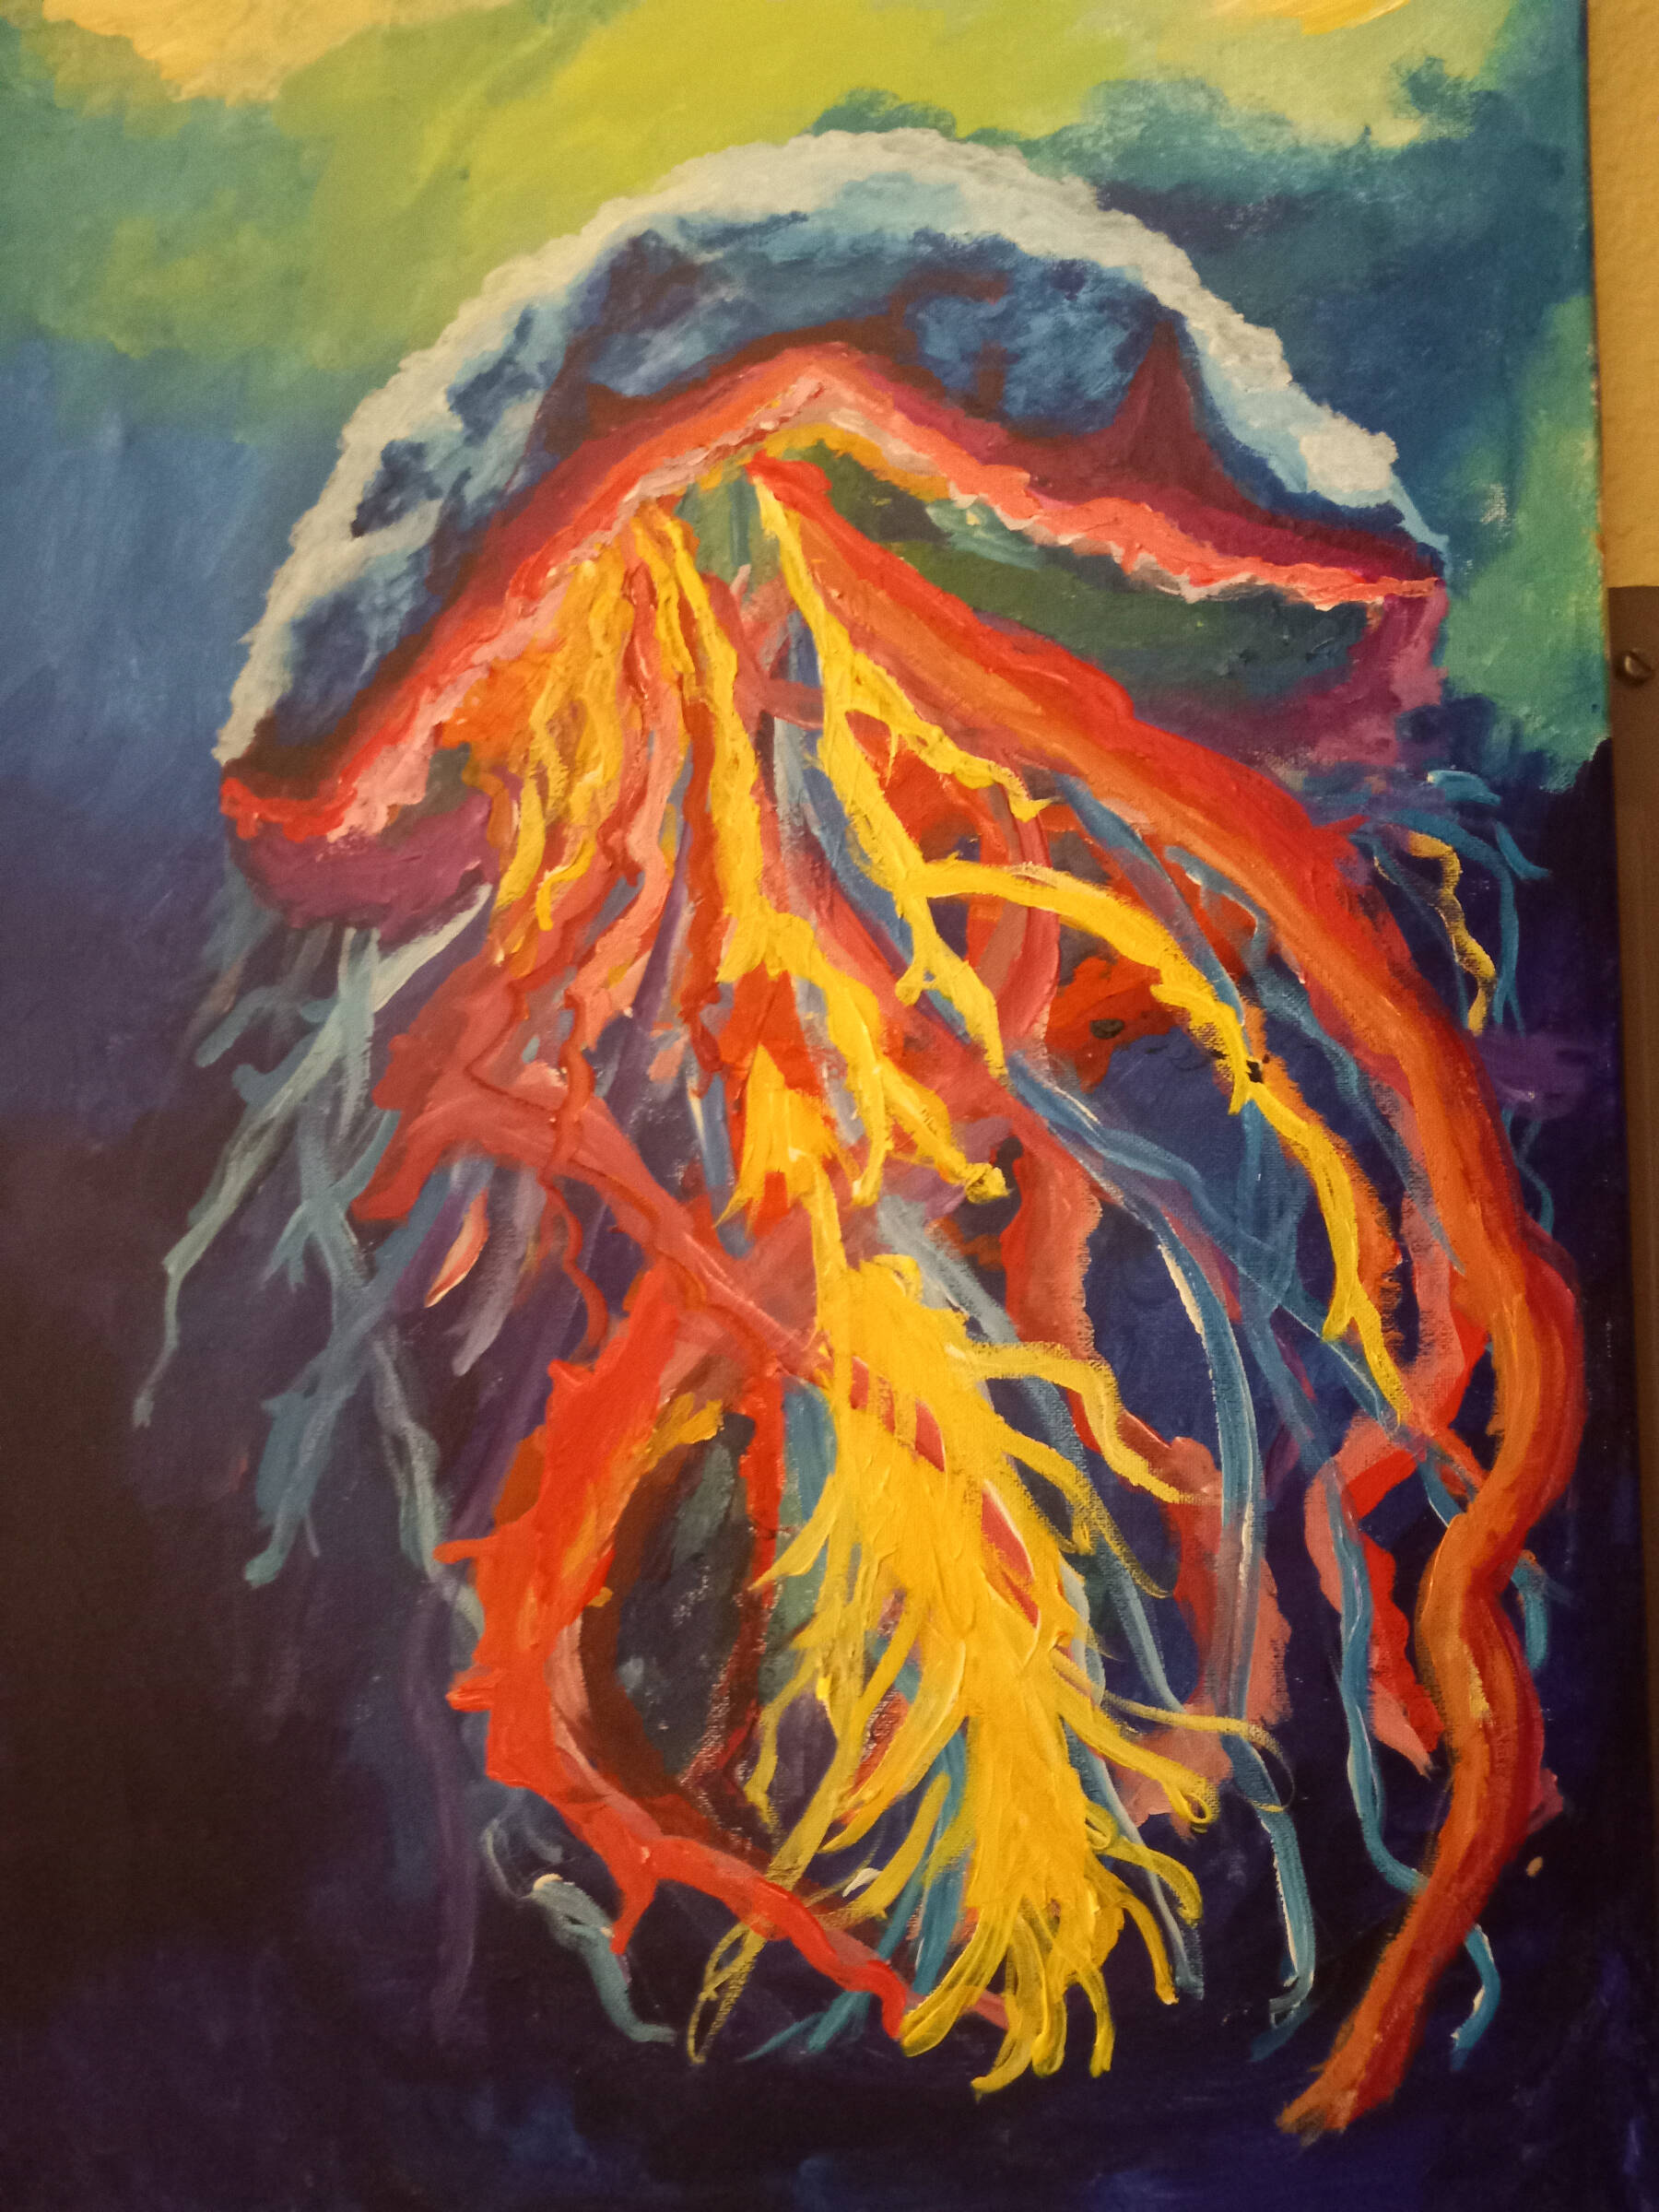 “Jelly Fish,” an acrylic painting by June K Denver, is on display at Homer Council on the Arts through March. Photo provided by Homer Council on the Arts